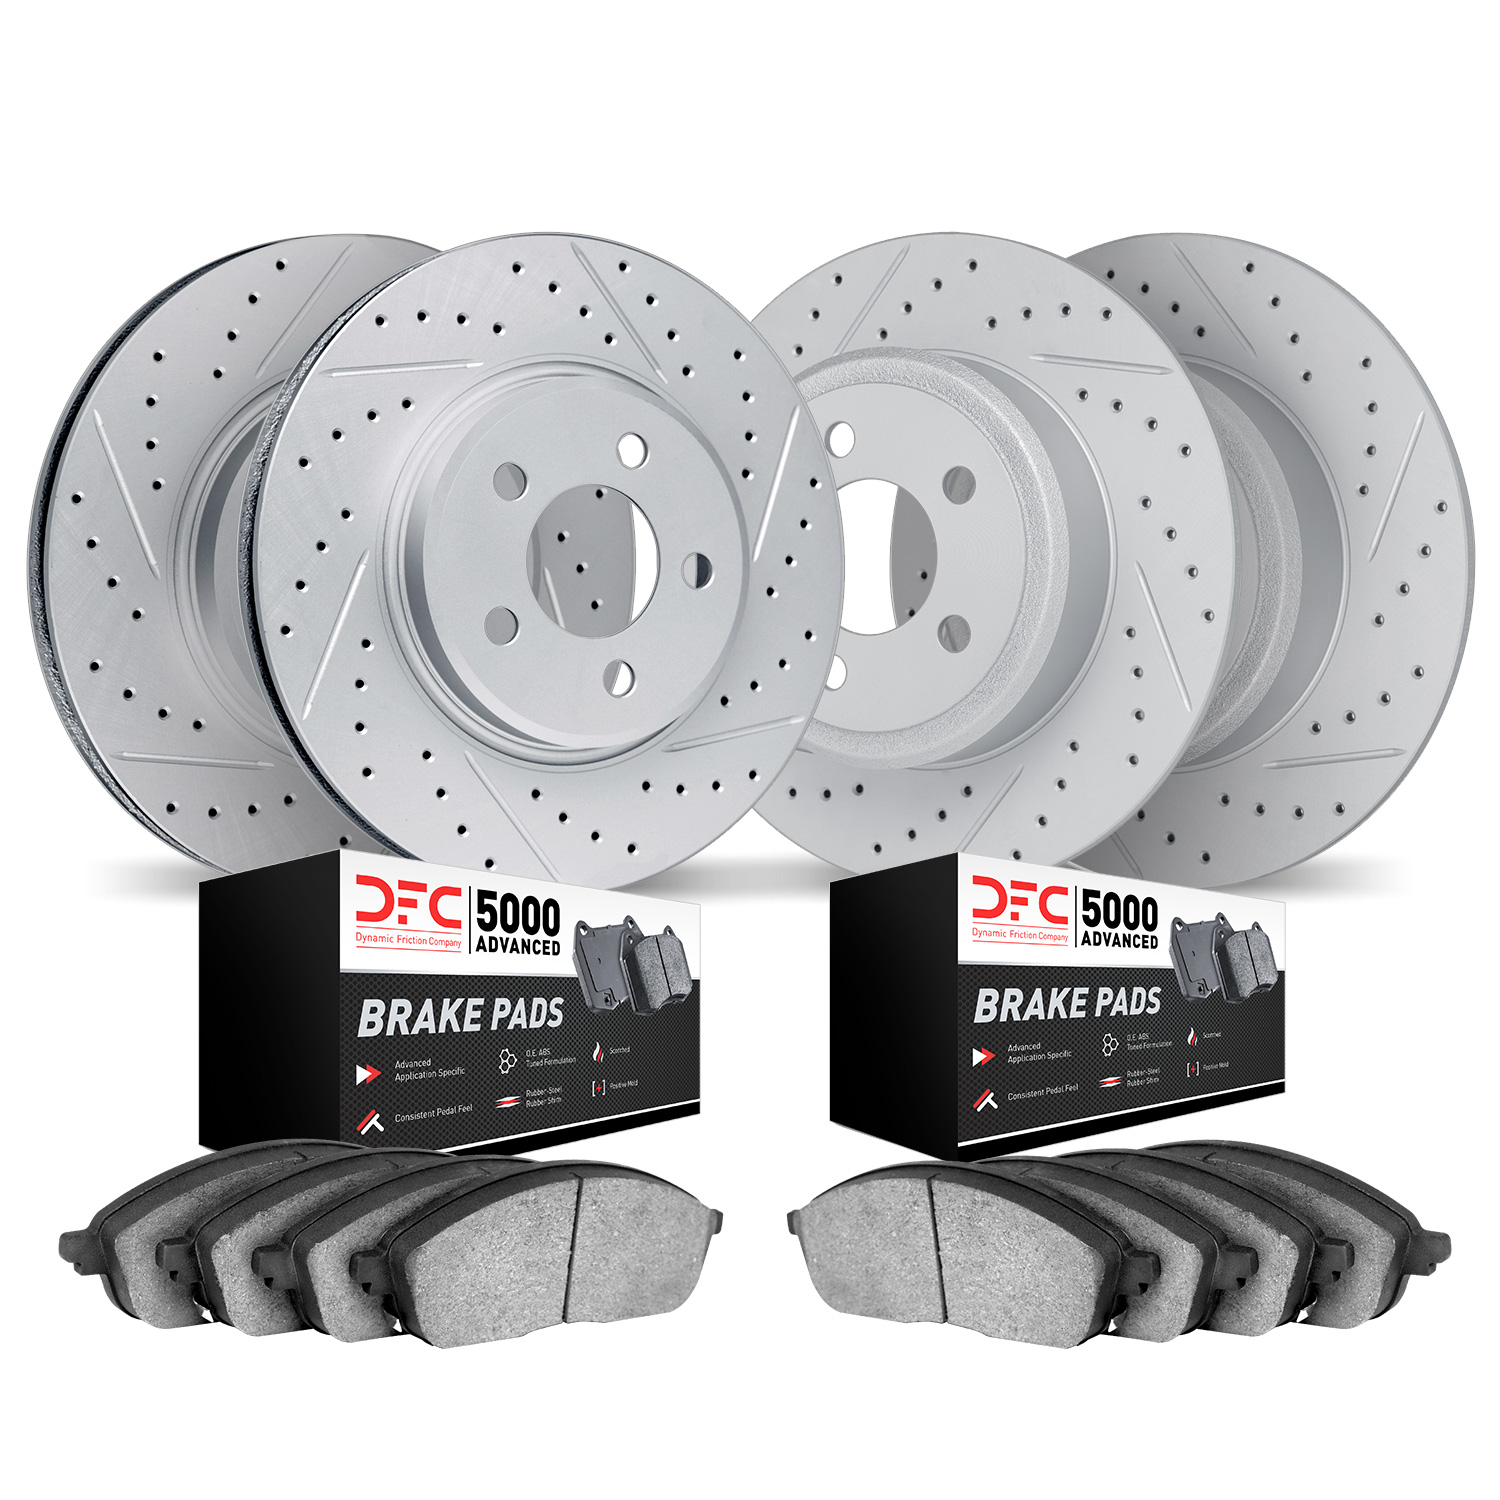 2504-31048 Geoperformance Drilled/Slotted Rotors w/5000 Advanced Brake Pads Kit, 2000-2006 BMW, Position: Front and Rear